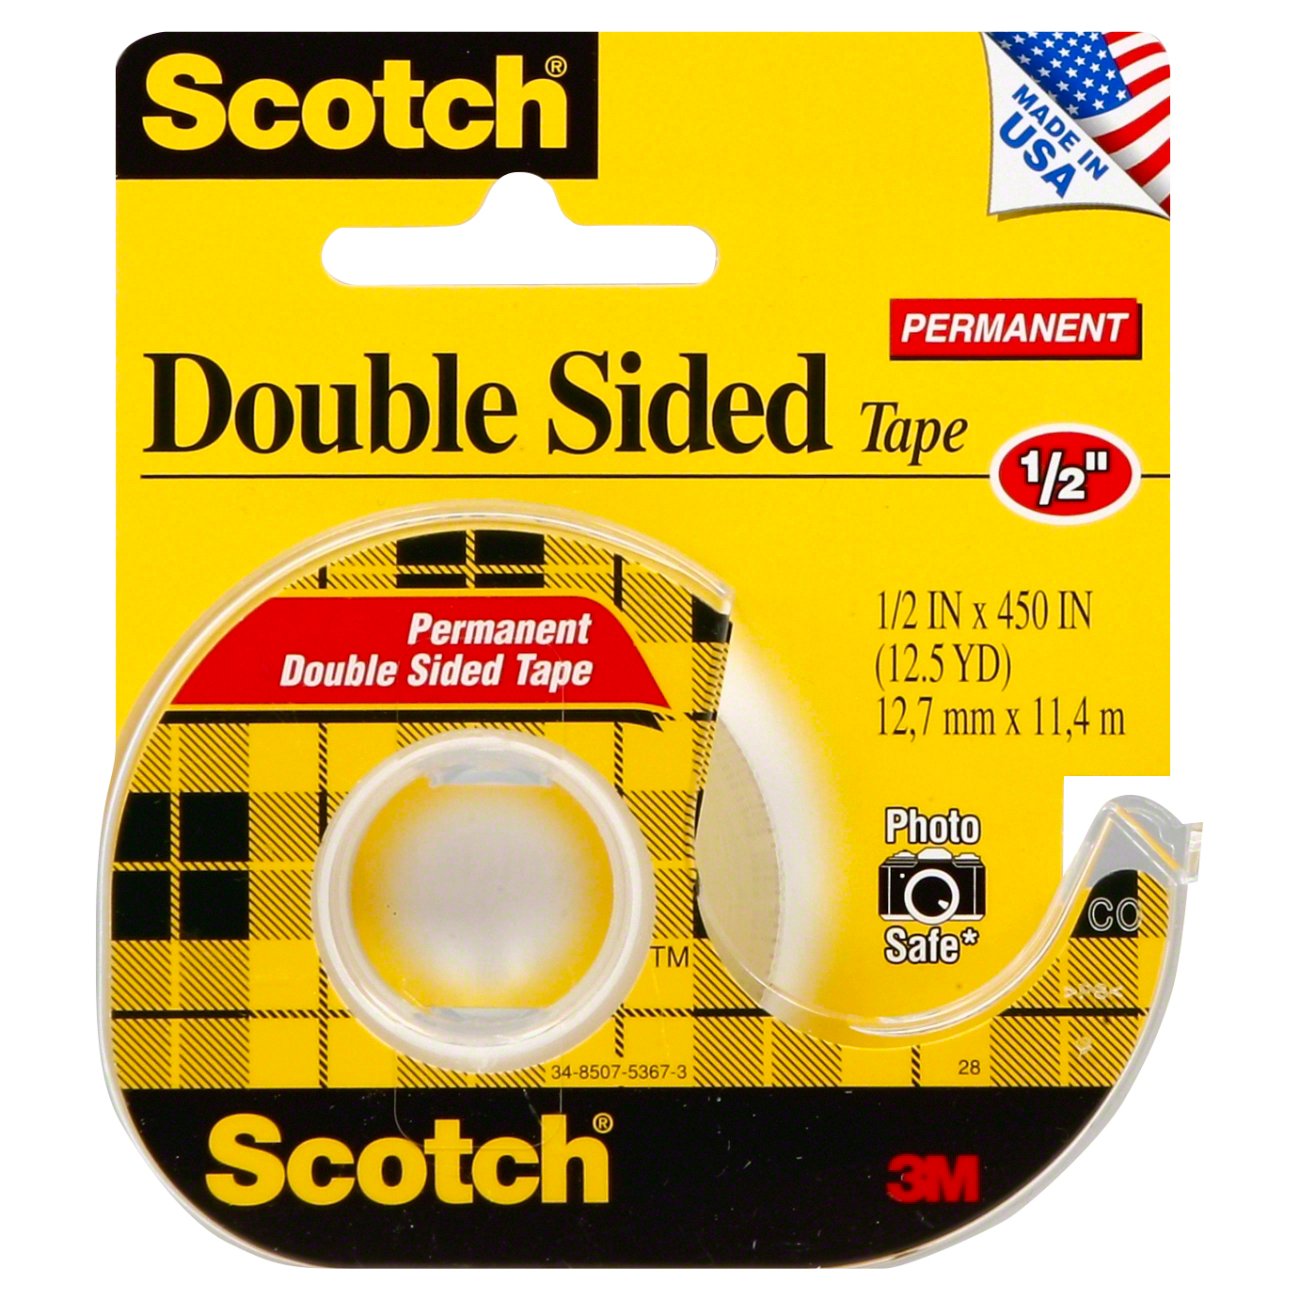 Scotch Double Sided Tape ‑ Shop Tape at 